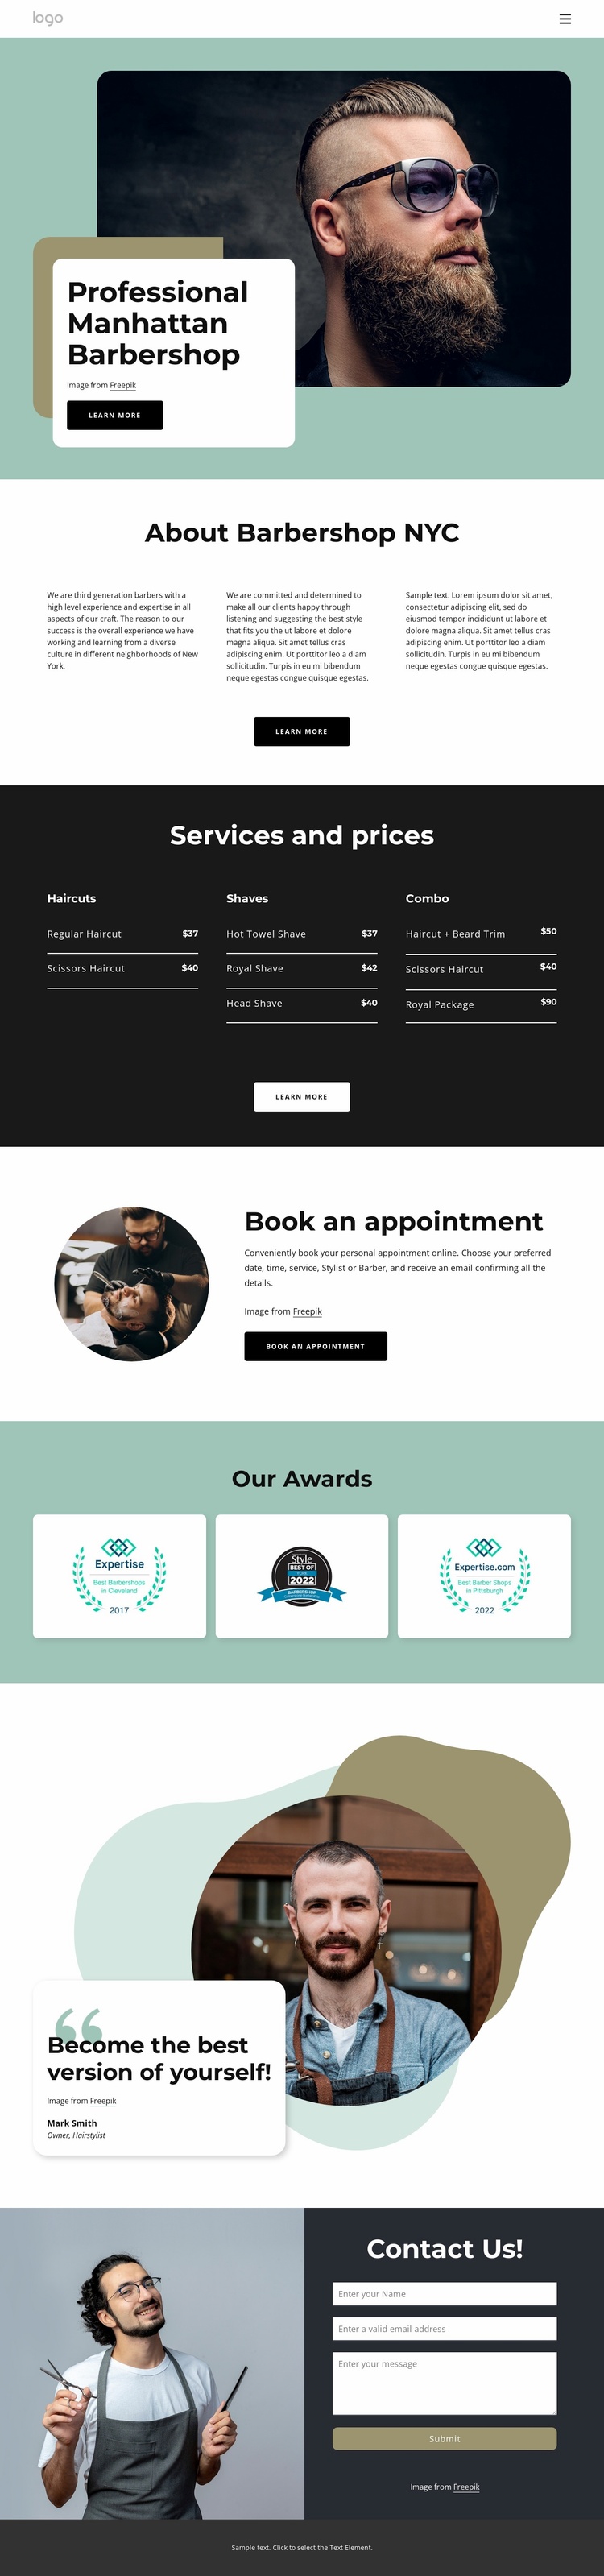 About Manhattan barbershop eCommerce Template